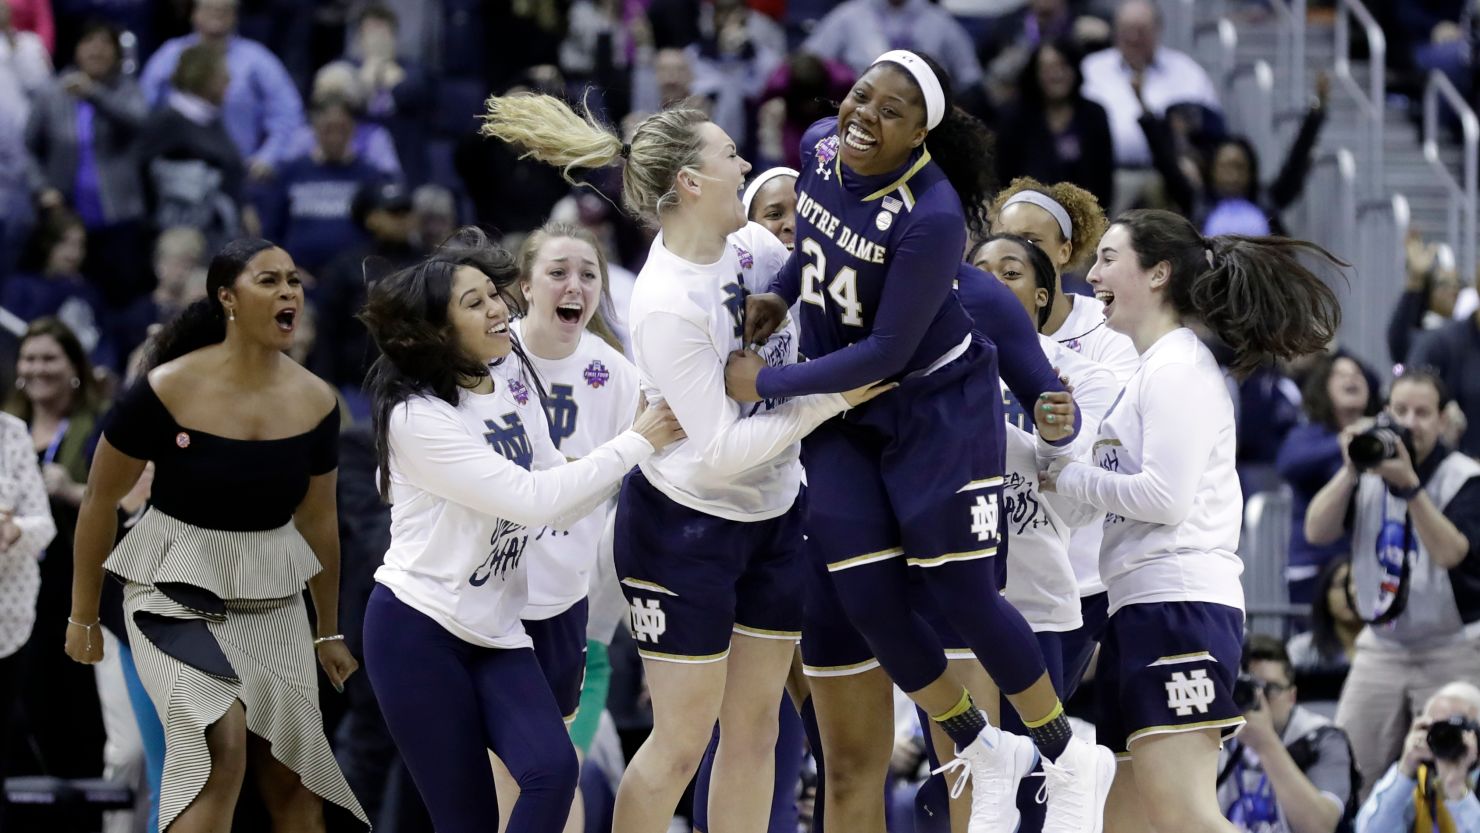 Notre Dame's Arike Ogunbowale (24) celebrates after making the game-winning basket to defeat Connecticut in overtime in the semifinals of the women's NCAA Final Four college basketball tournament on Friday.